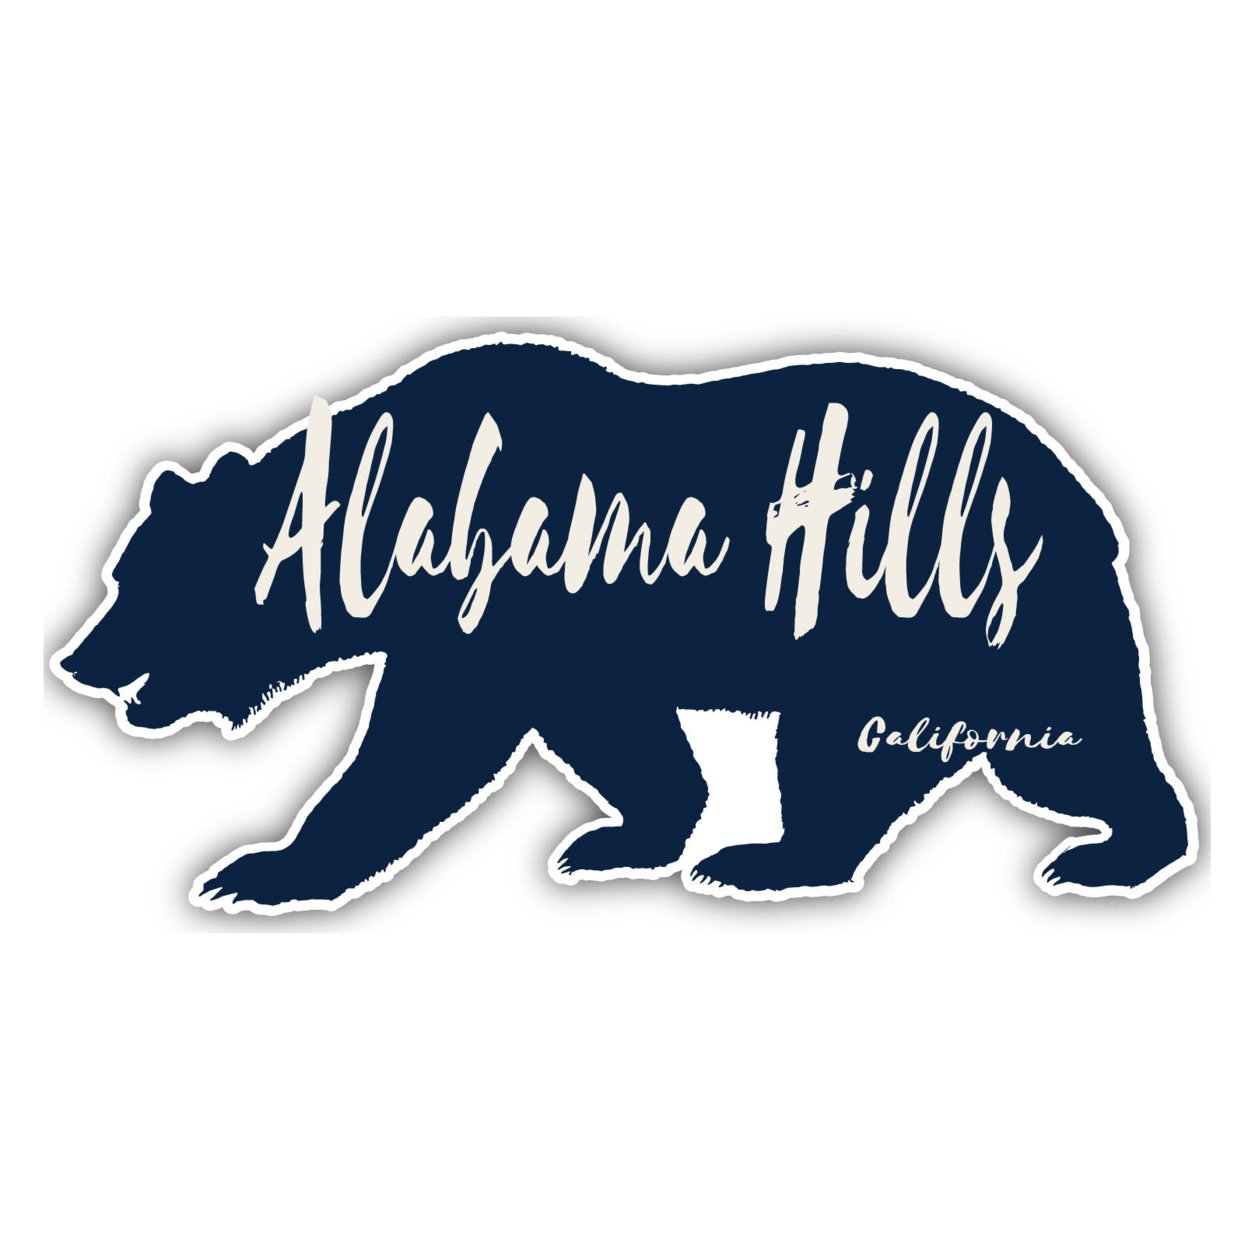 Alabama Hills California Souvenir Decorative Stickers (Choose Theme And Size) - 4-Pack, 6-Inch, Great Outdoors